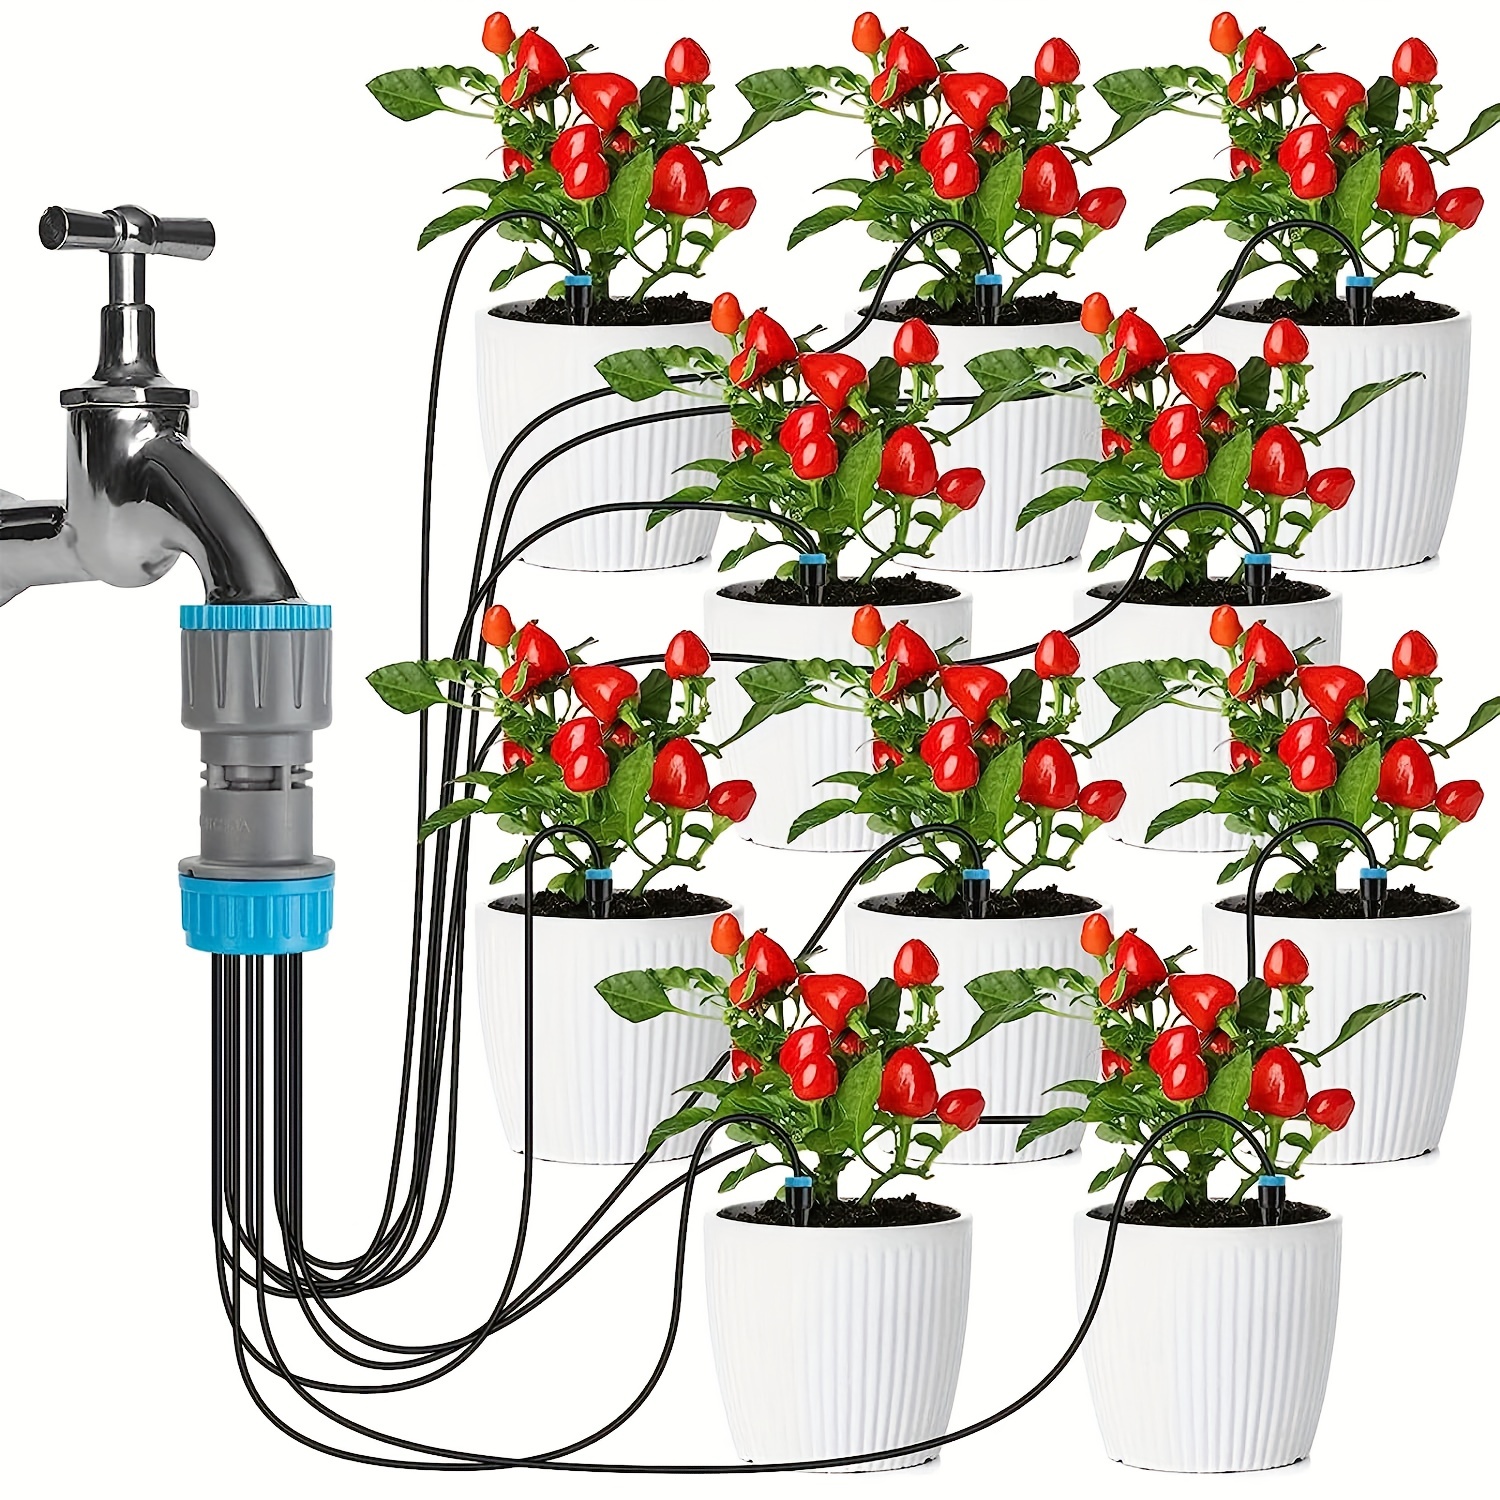 

1 Set Garden Automatic Watering Device, Gardening Irrigation System, Drip Seepage Device With 10 Dripper Head Kit For Greenhouse Balcony Pot Plants Accessories (threaded Connection: 1/2" (20mm)